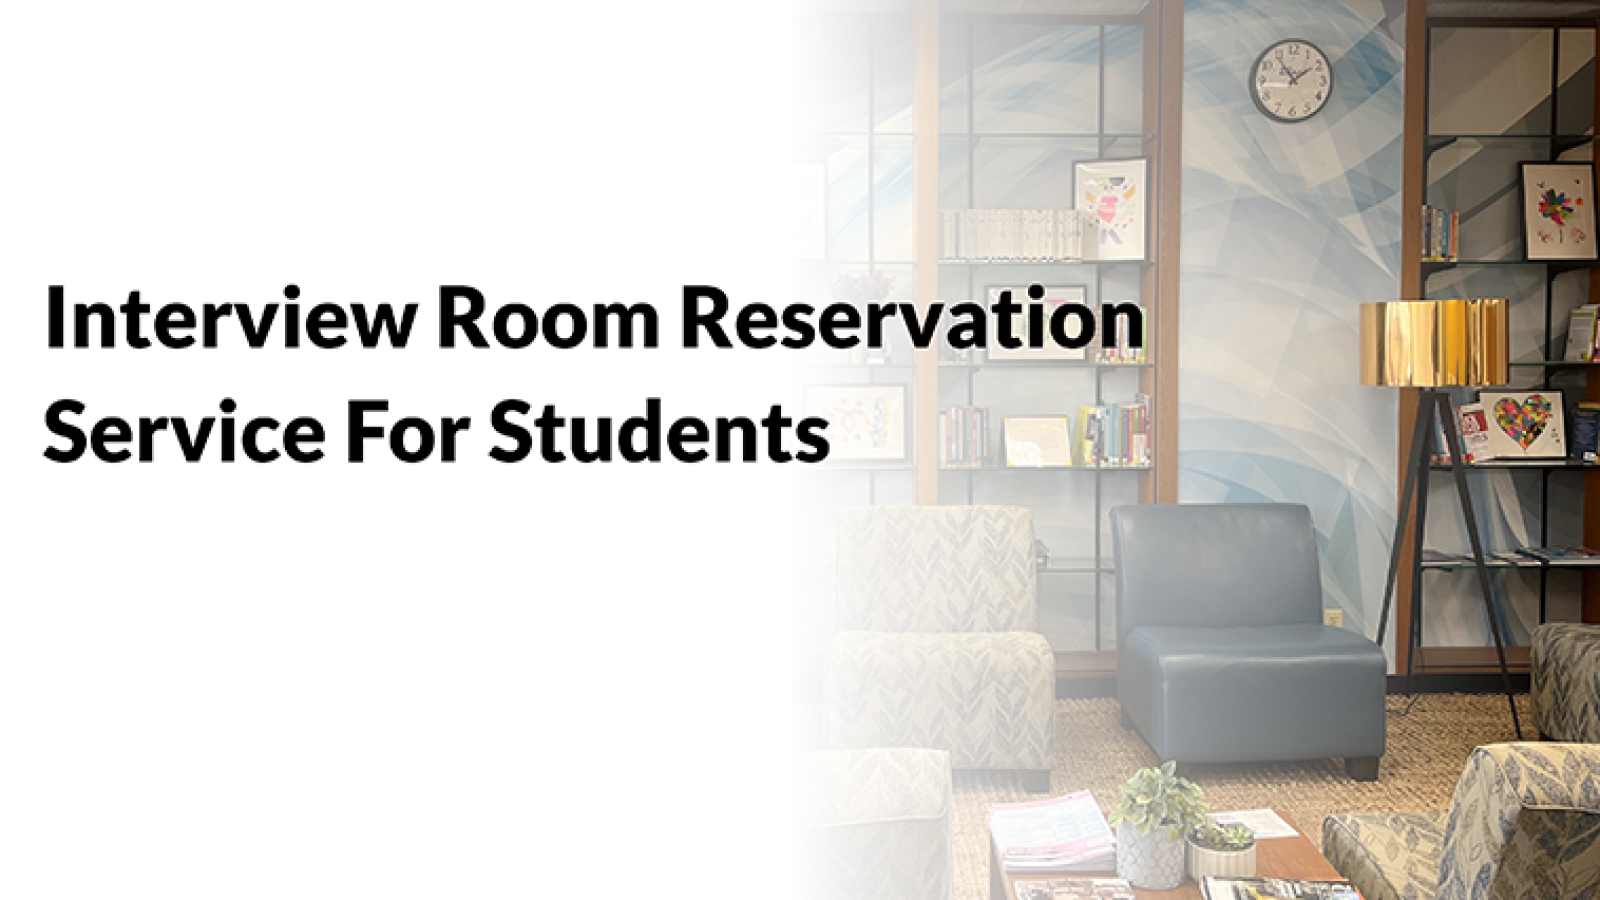 Interview Room Reservation Service for Students